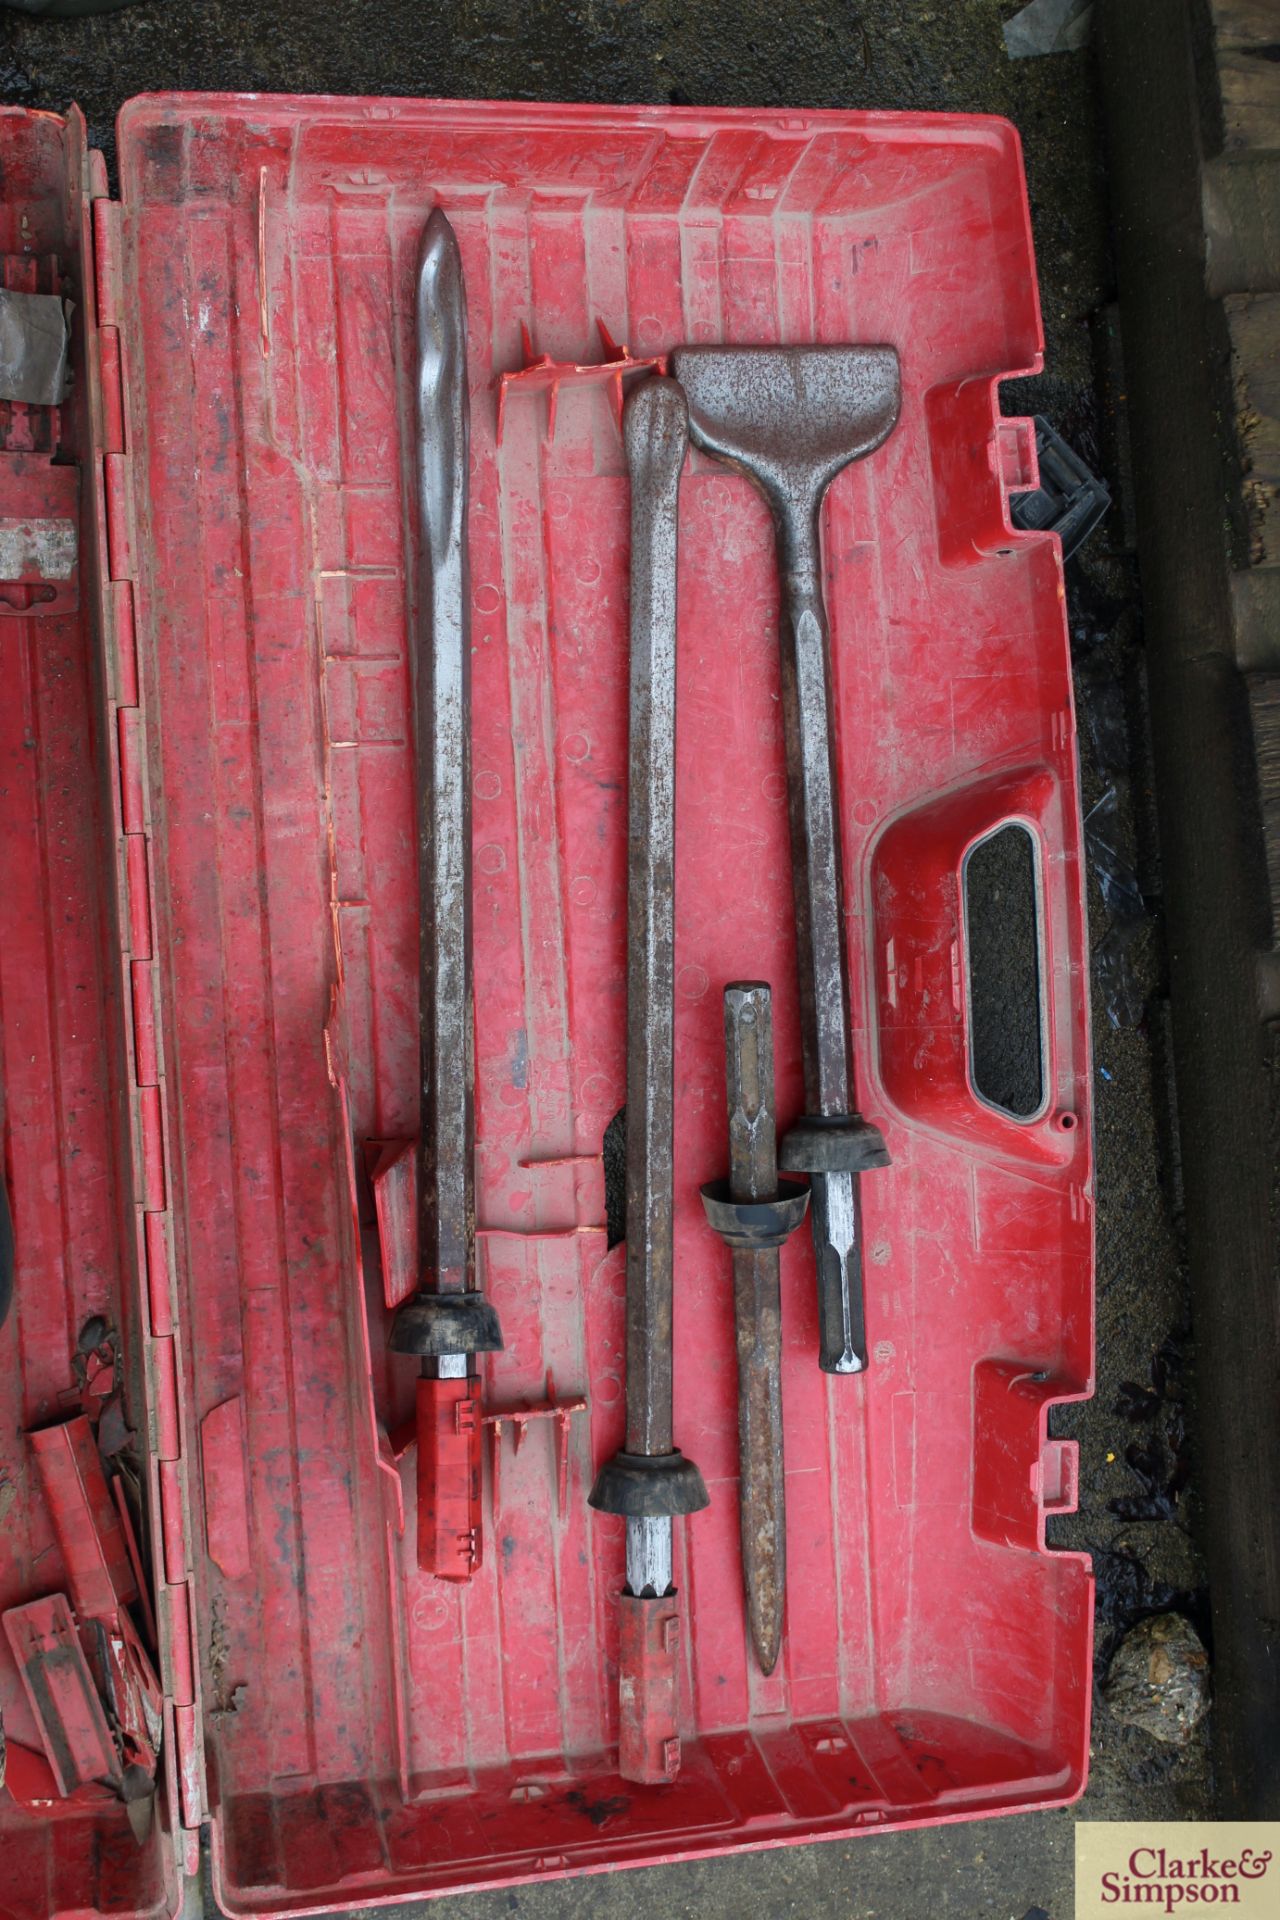 Hilti TE 905-AVR 110V breaker in case with various chisels. Vendor reports this was reconditioned - Image 6 of 6